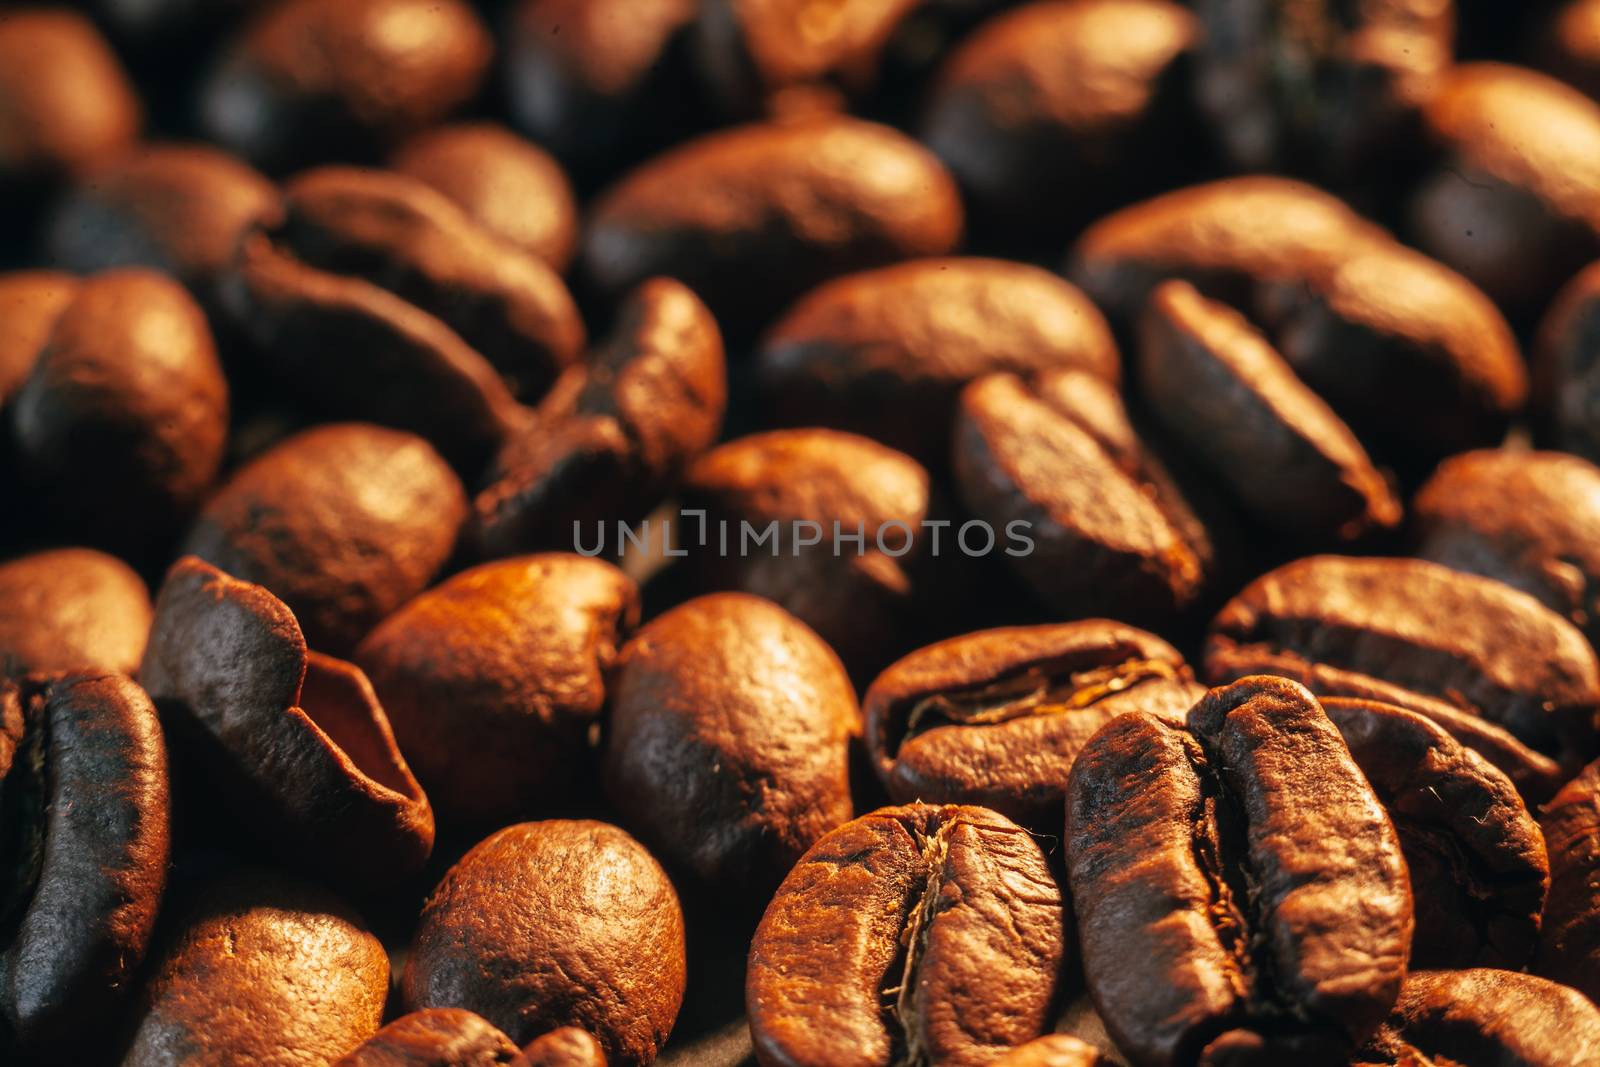 A scattering of coffee beans on a dark countertop in warm light.